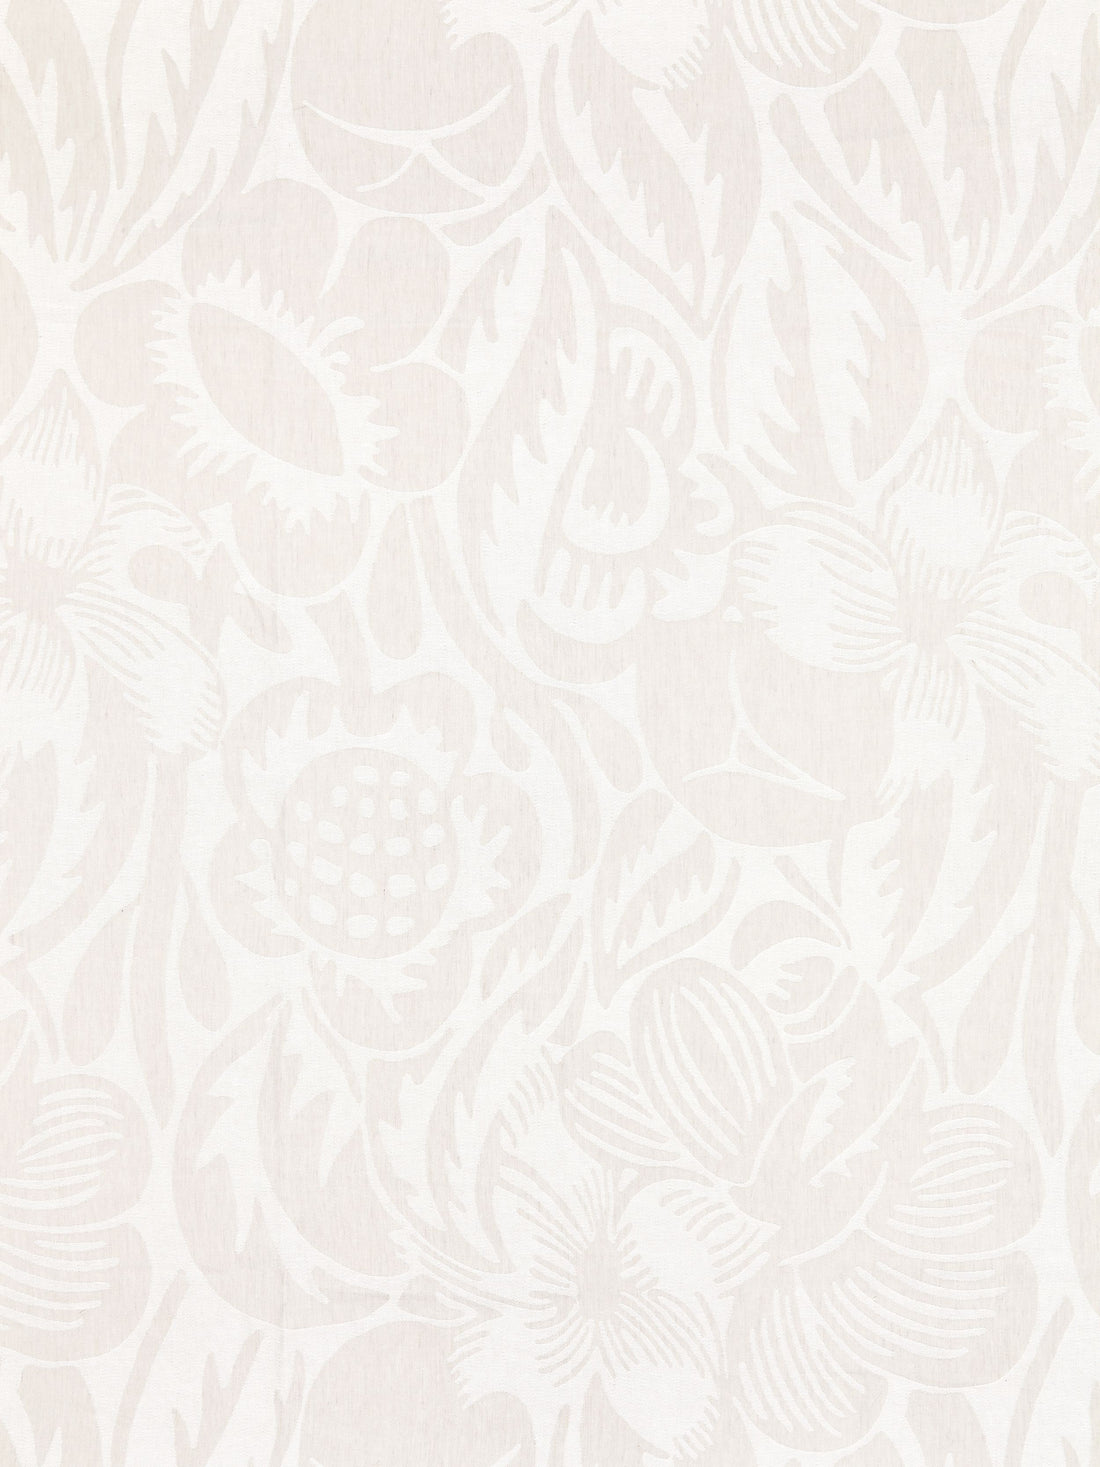 Deco Flower fabric in pearl grey color - pattern number SC 000227131 - by Scalamandre in the Scalamandre Fabrics Book 1 collection